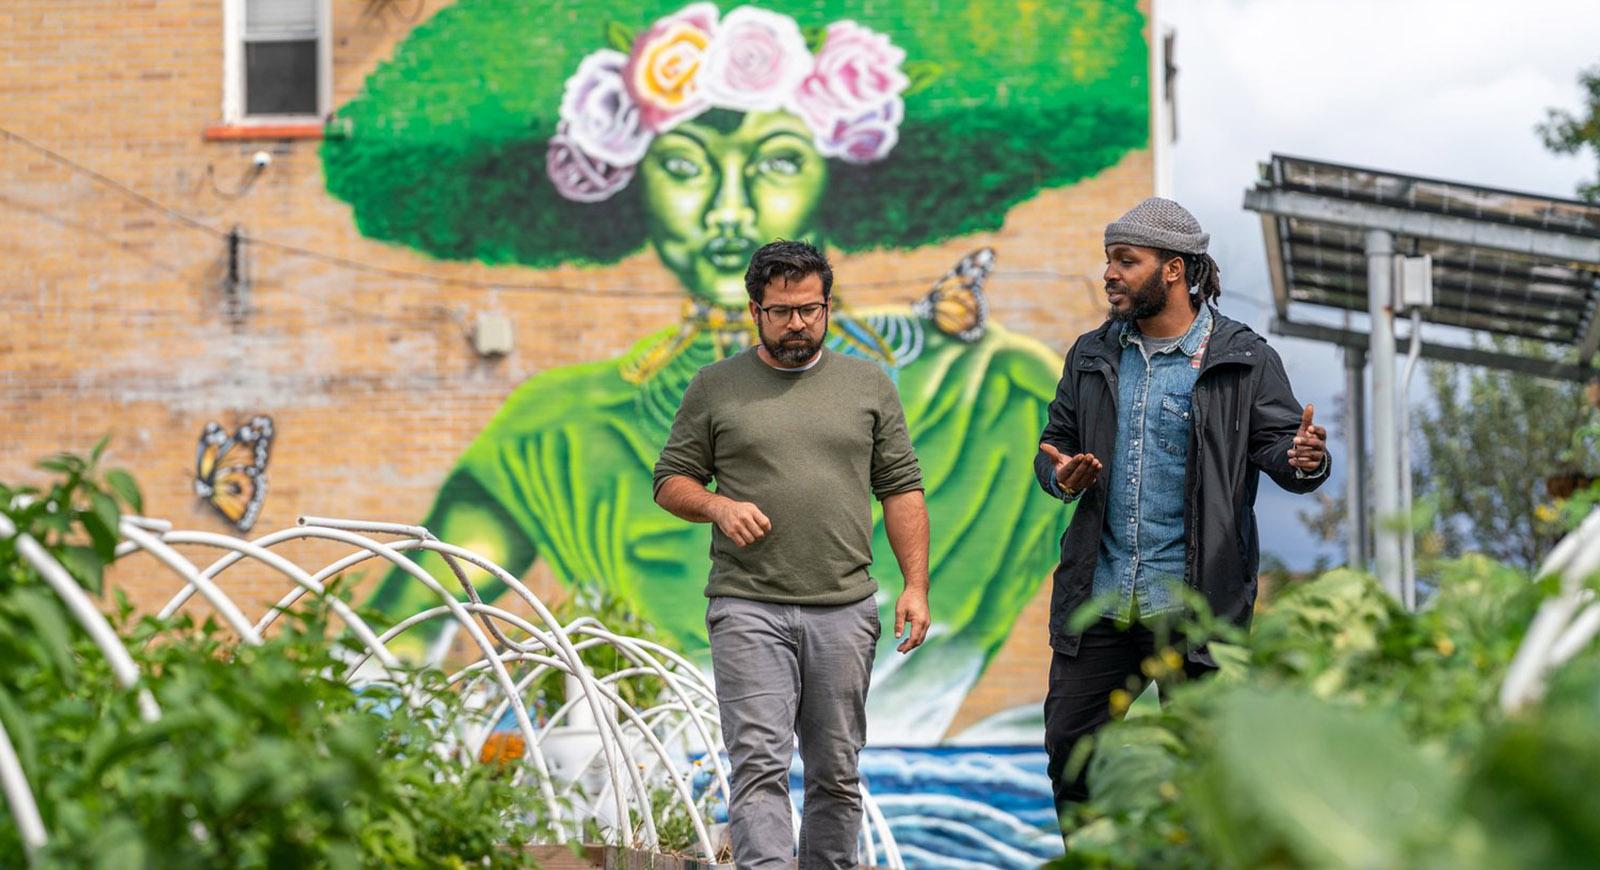 Photo of two men walking and talking in a community garden, with a brick wall with a large and colorful mural in the background